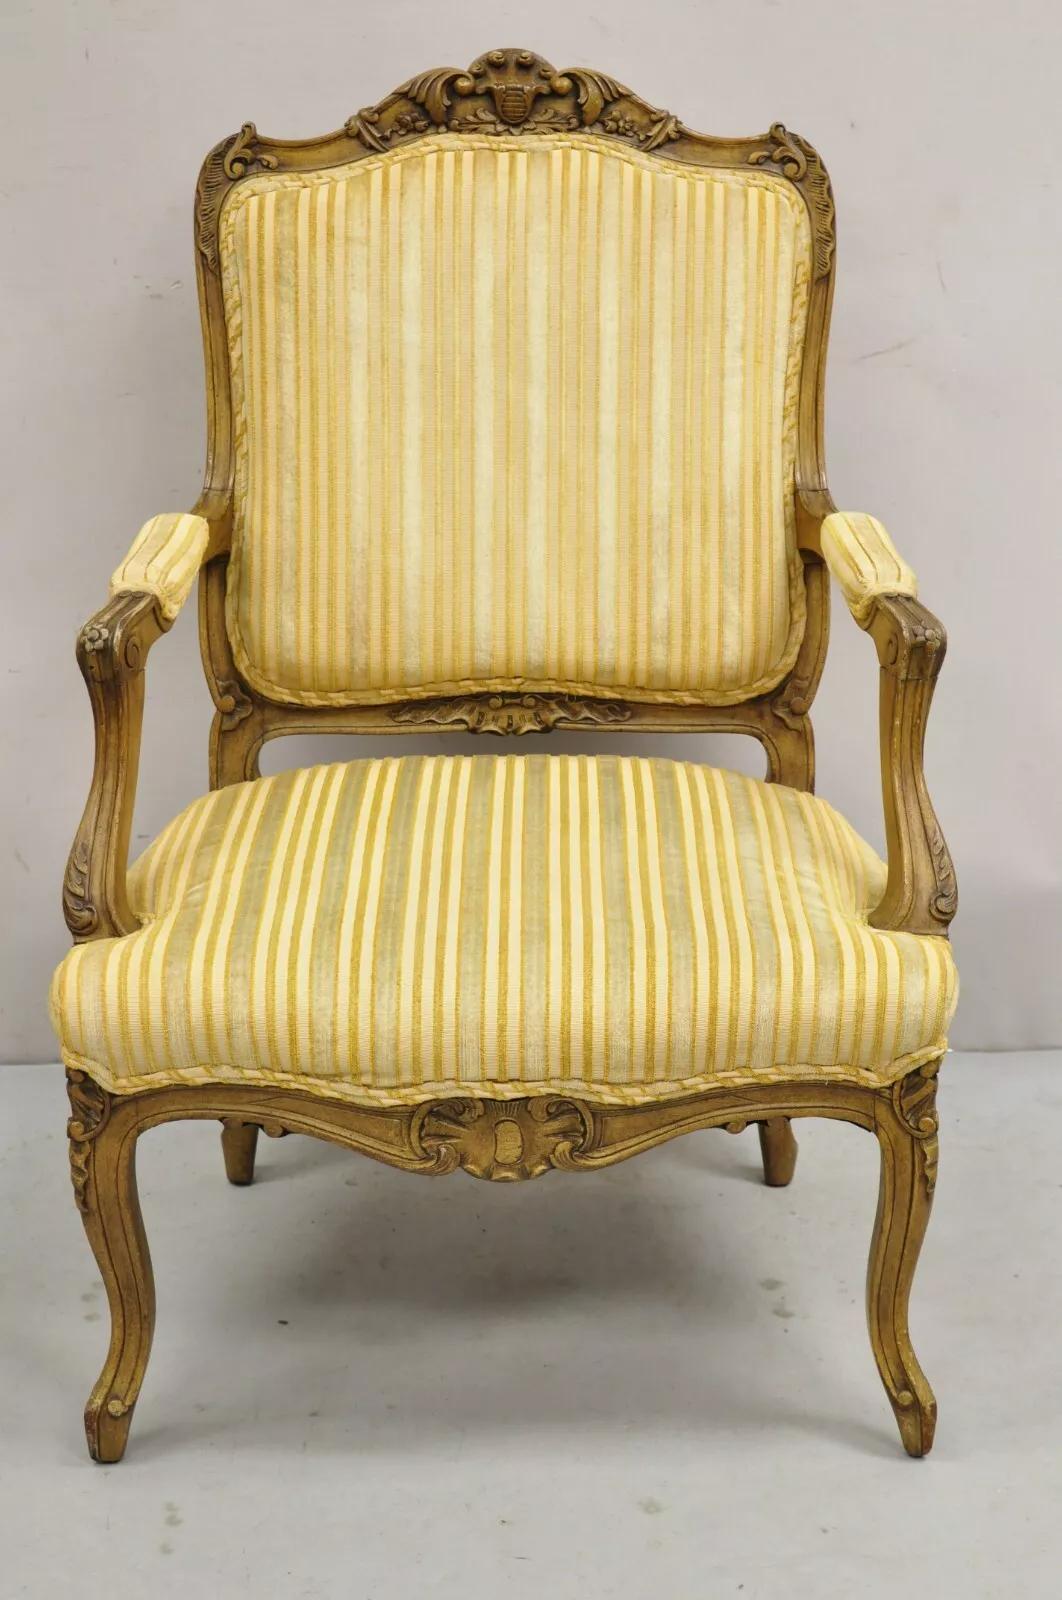 Vintage French Louis XV Style Carved Walnut Fauteuil Parlor Lounge Arm Chair. Circa Early 20th Century. Measurements: 40